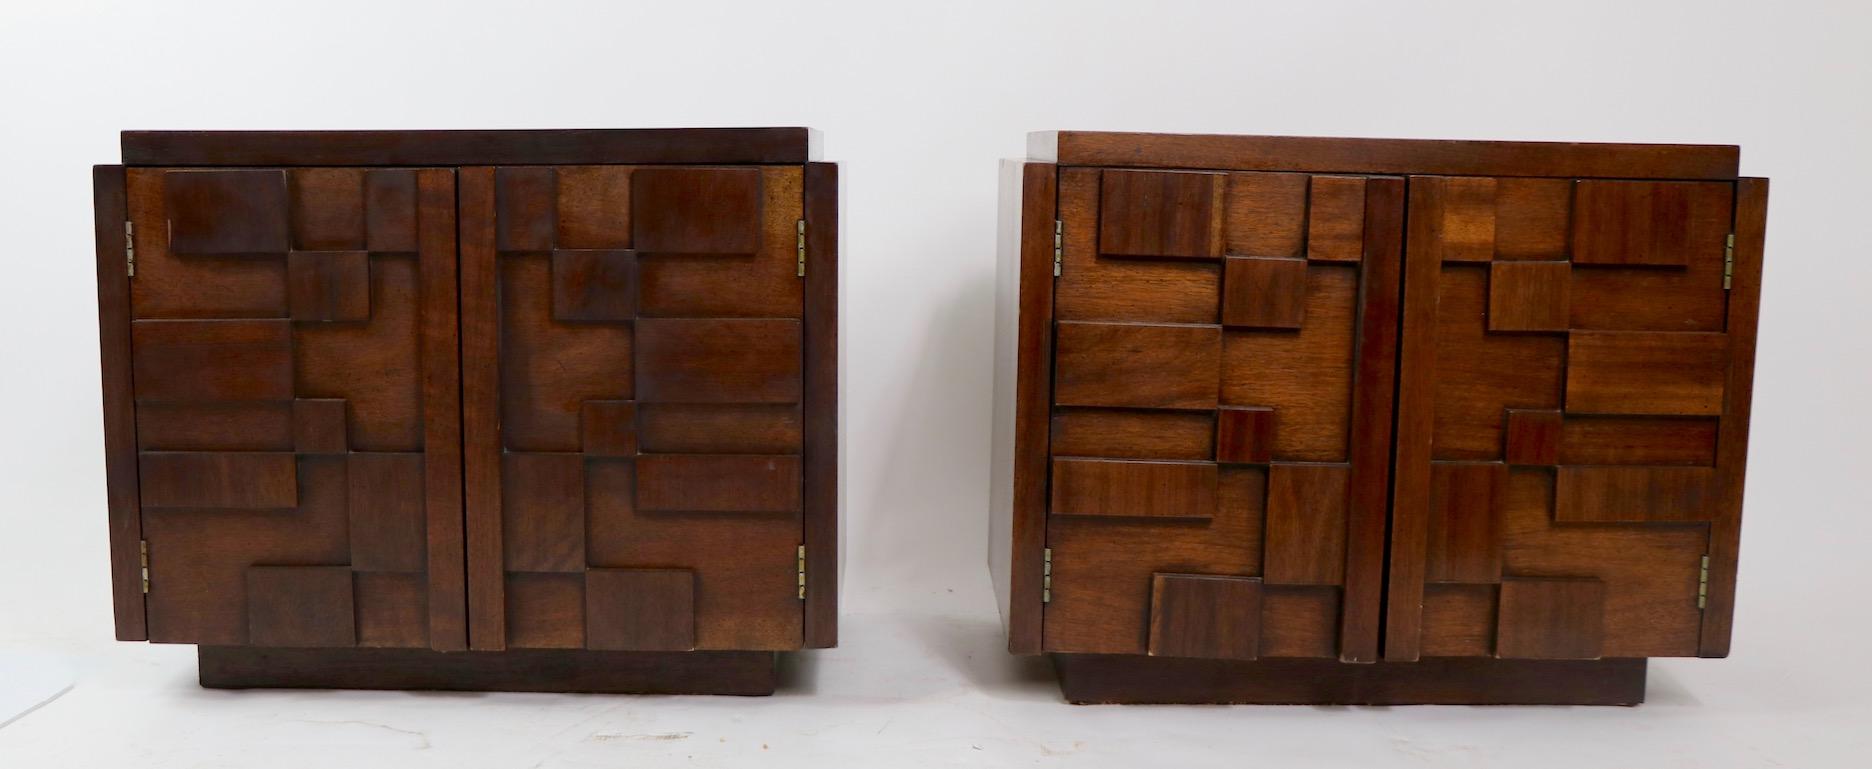 Chic pair of Brutalist style block front nightstands, Mosaic Line, manufactured by Lane. Each stand has two doors which open to reveal shelved storage. These are walnut veneer, with a dark tone finish. Both are in clean, original, ready to use